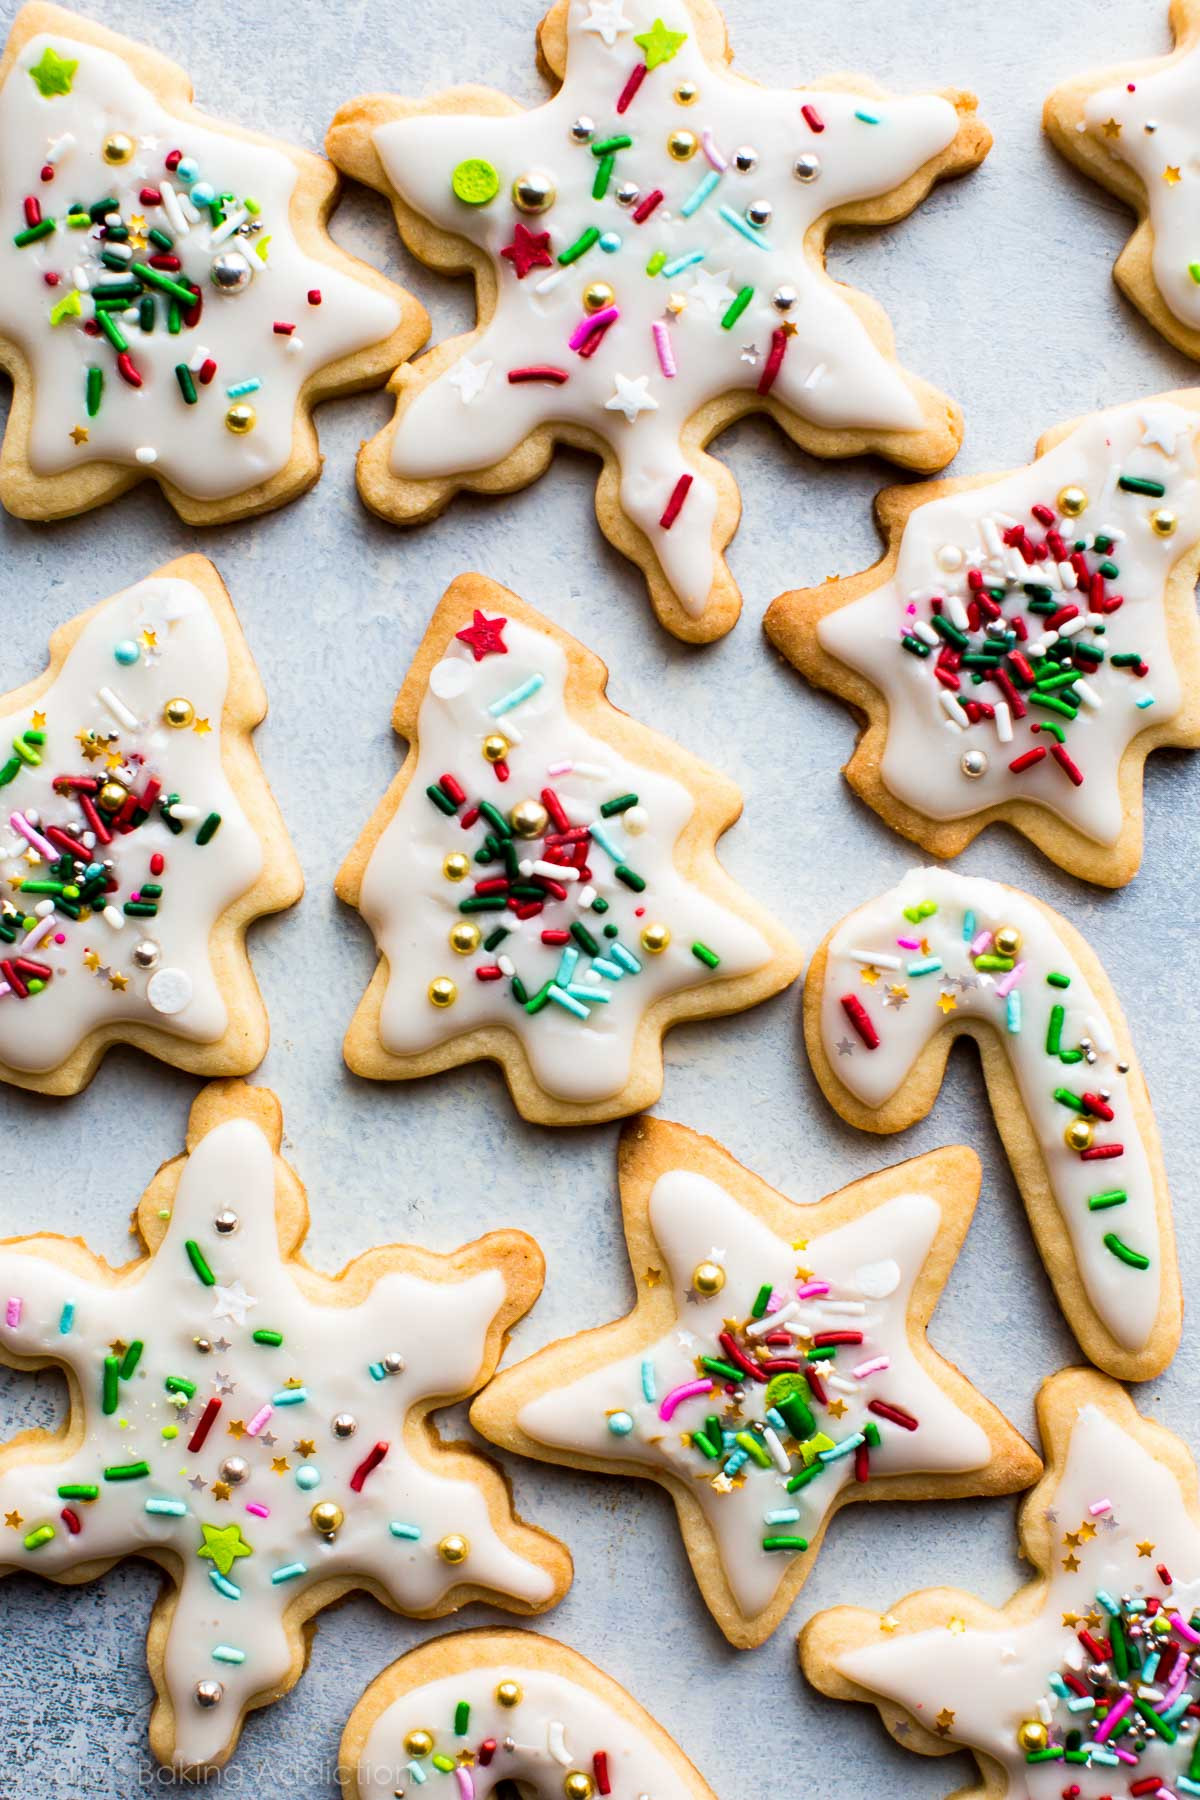 Easy Christmas Sugar Cookies
 Holiday Cut Out Sugar Cookies with Easy Icing Sallys